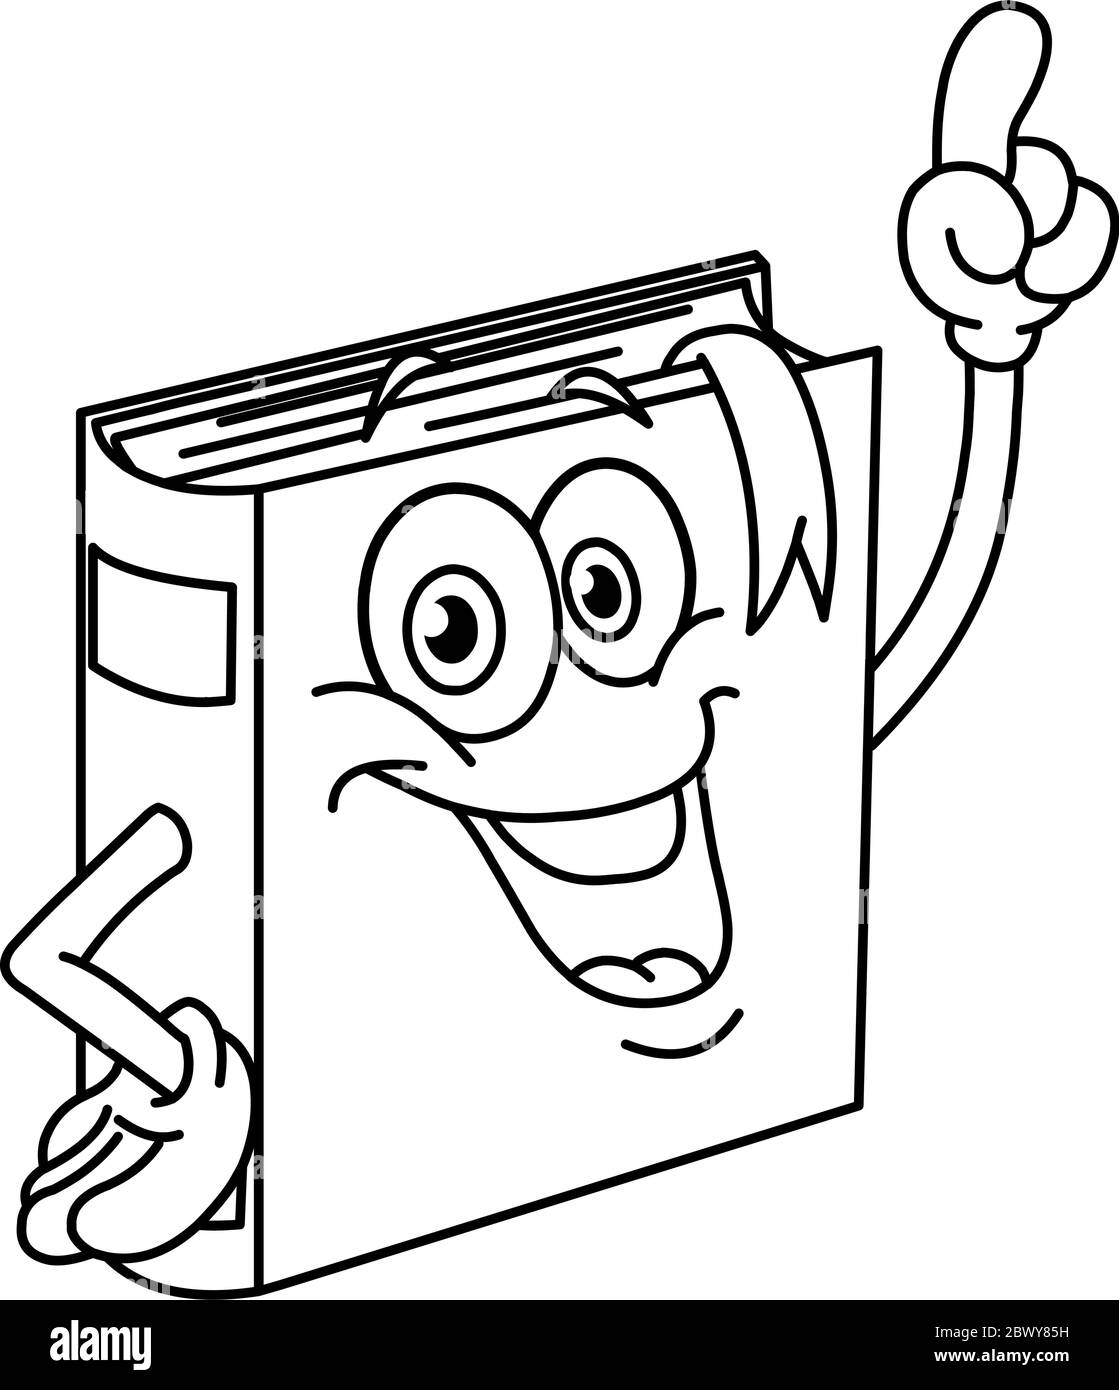 https://c8.alamy.com/comp/2BWY85H/outlined-book-cartoon-pointing-with-his-finger-vector-illustration-coloring-page-2BWY85H.jpg